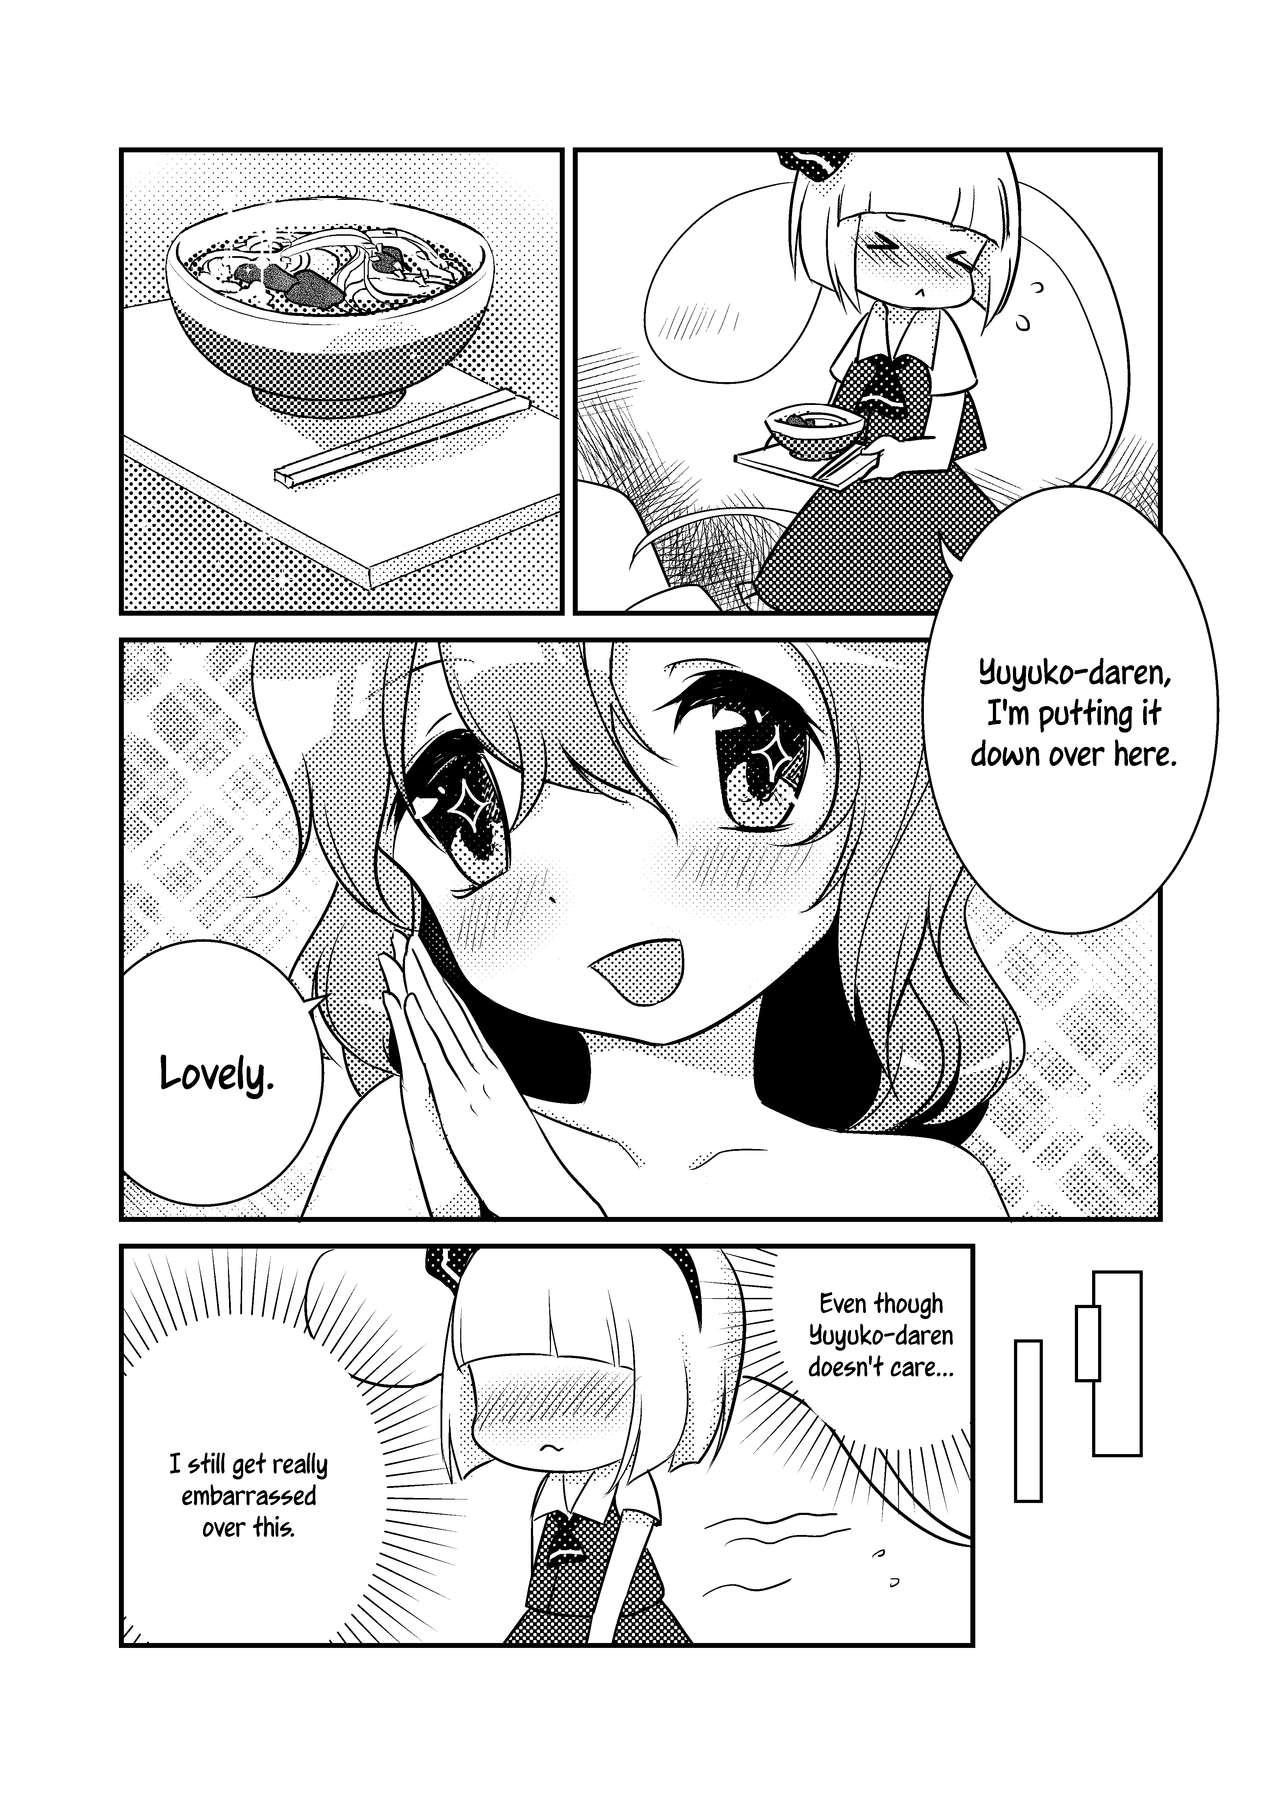 Sharing ????一起泡温泉吧！ | ????Let's Soak in the Hot Spring! - Touhou project Gay Kissing - Page 4